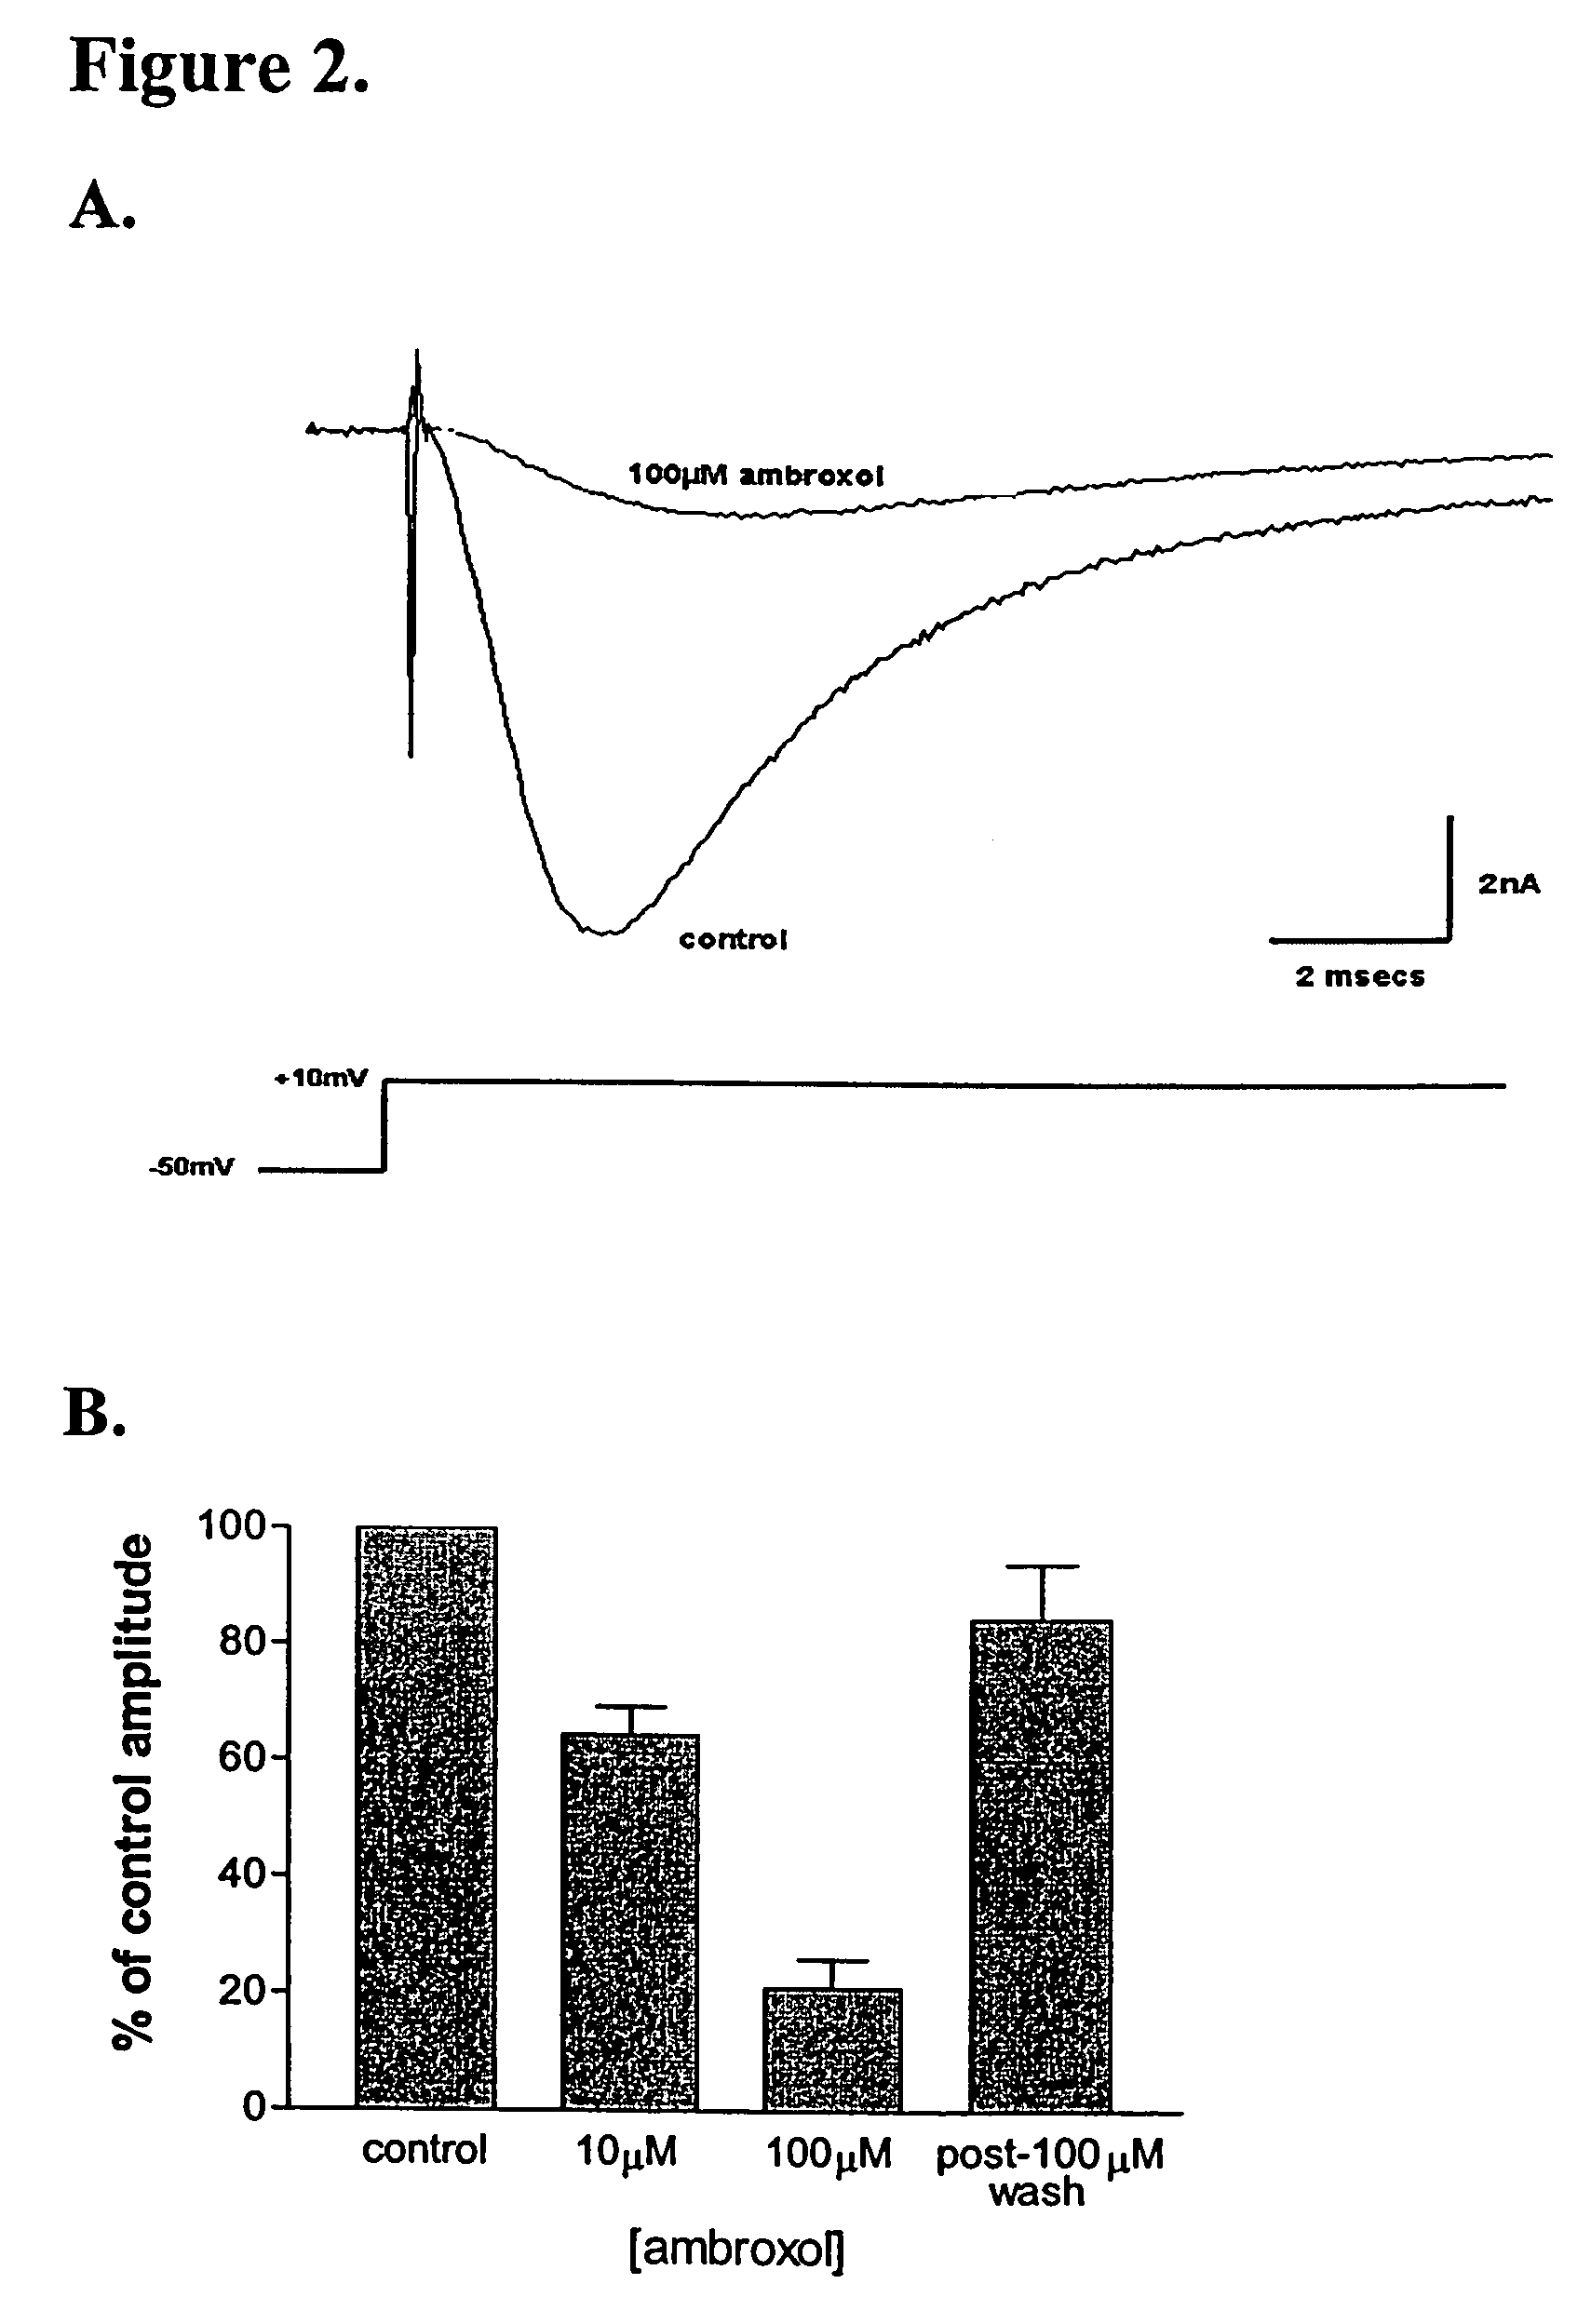 Methods of treating gastrointestinal tract disorders using sodium channel modulators